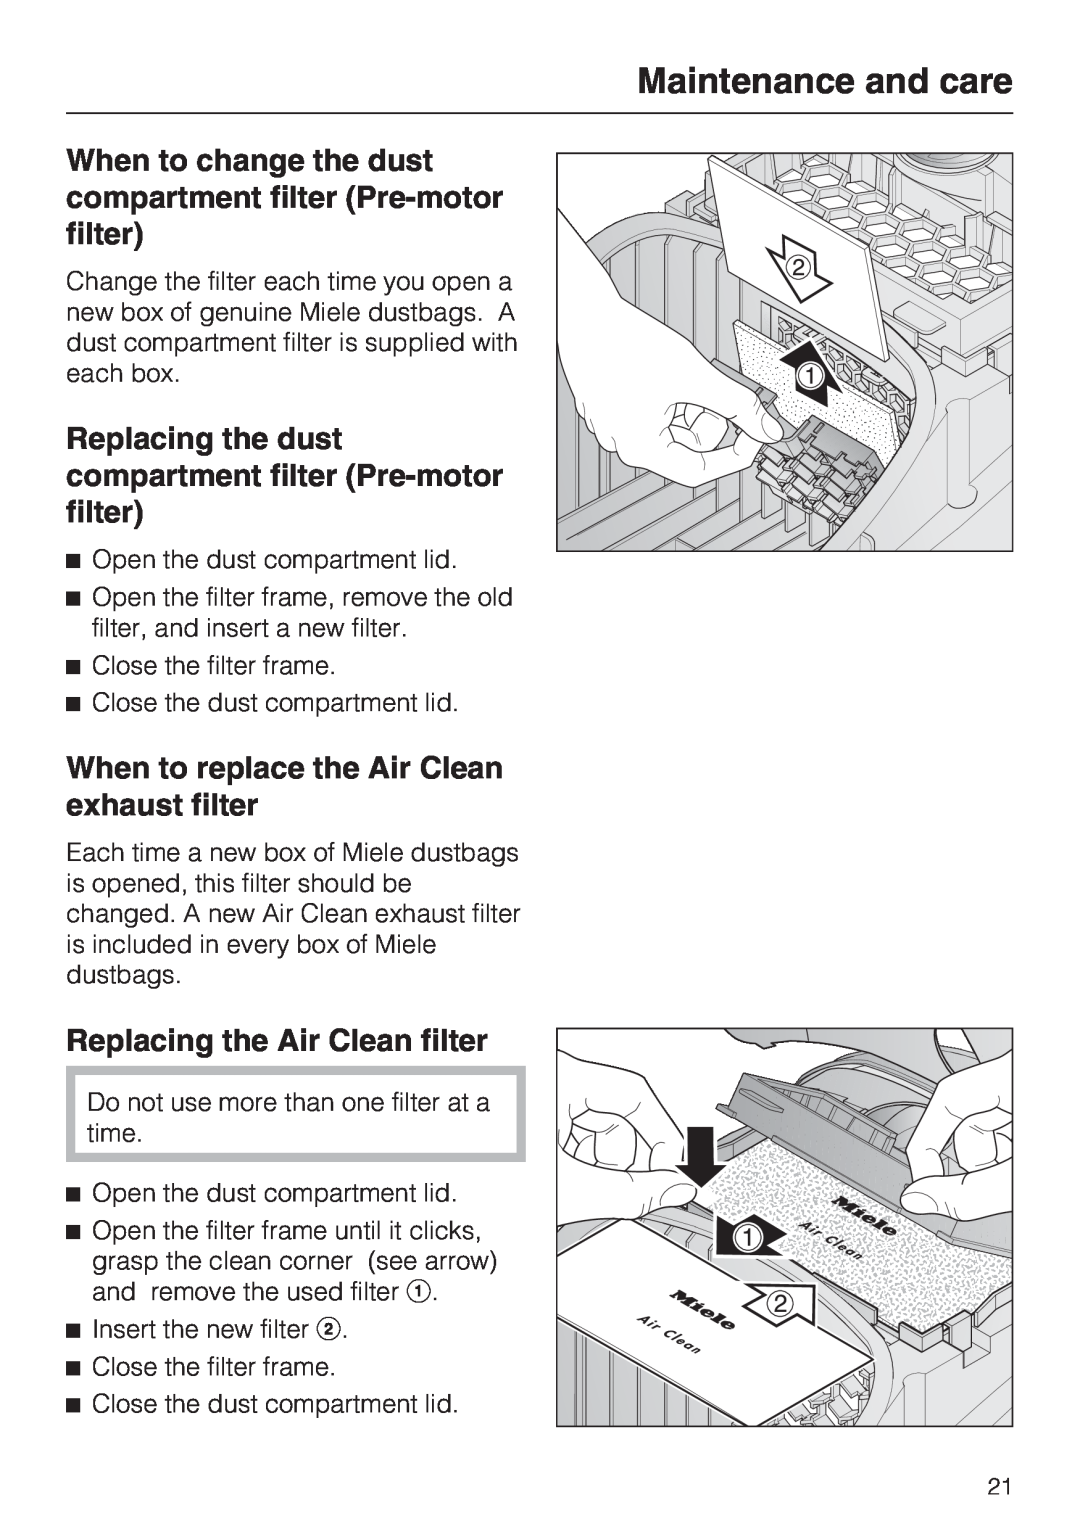 Miele S 2001 manual When to replace the Air Clean exhaust filter, Replacing the Air Clean filter, Maintenance and care 